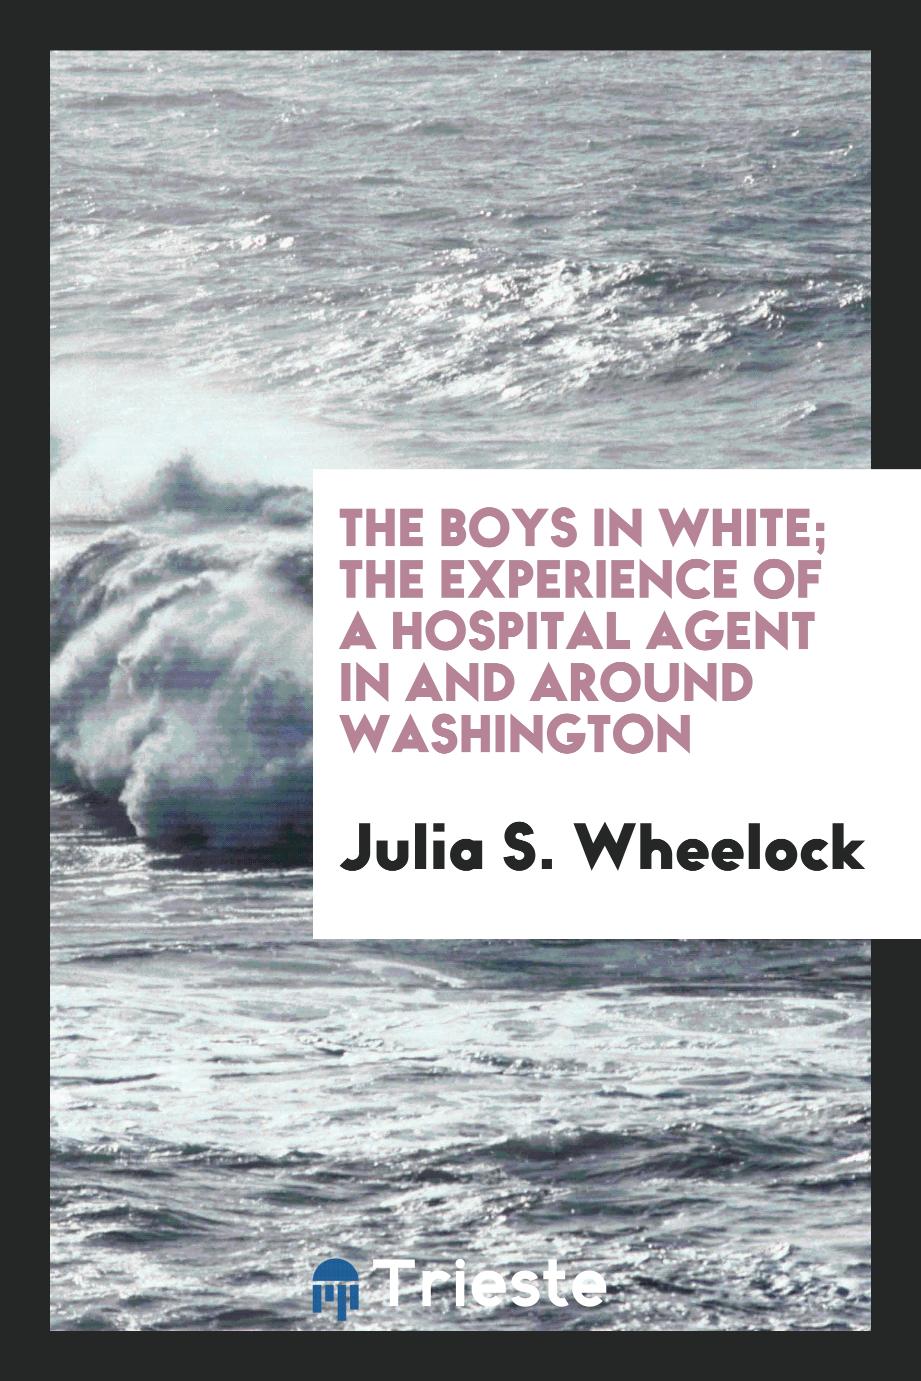 The boys in white; the experience of a hospital agent in and around Washington